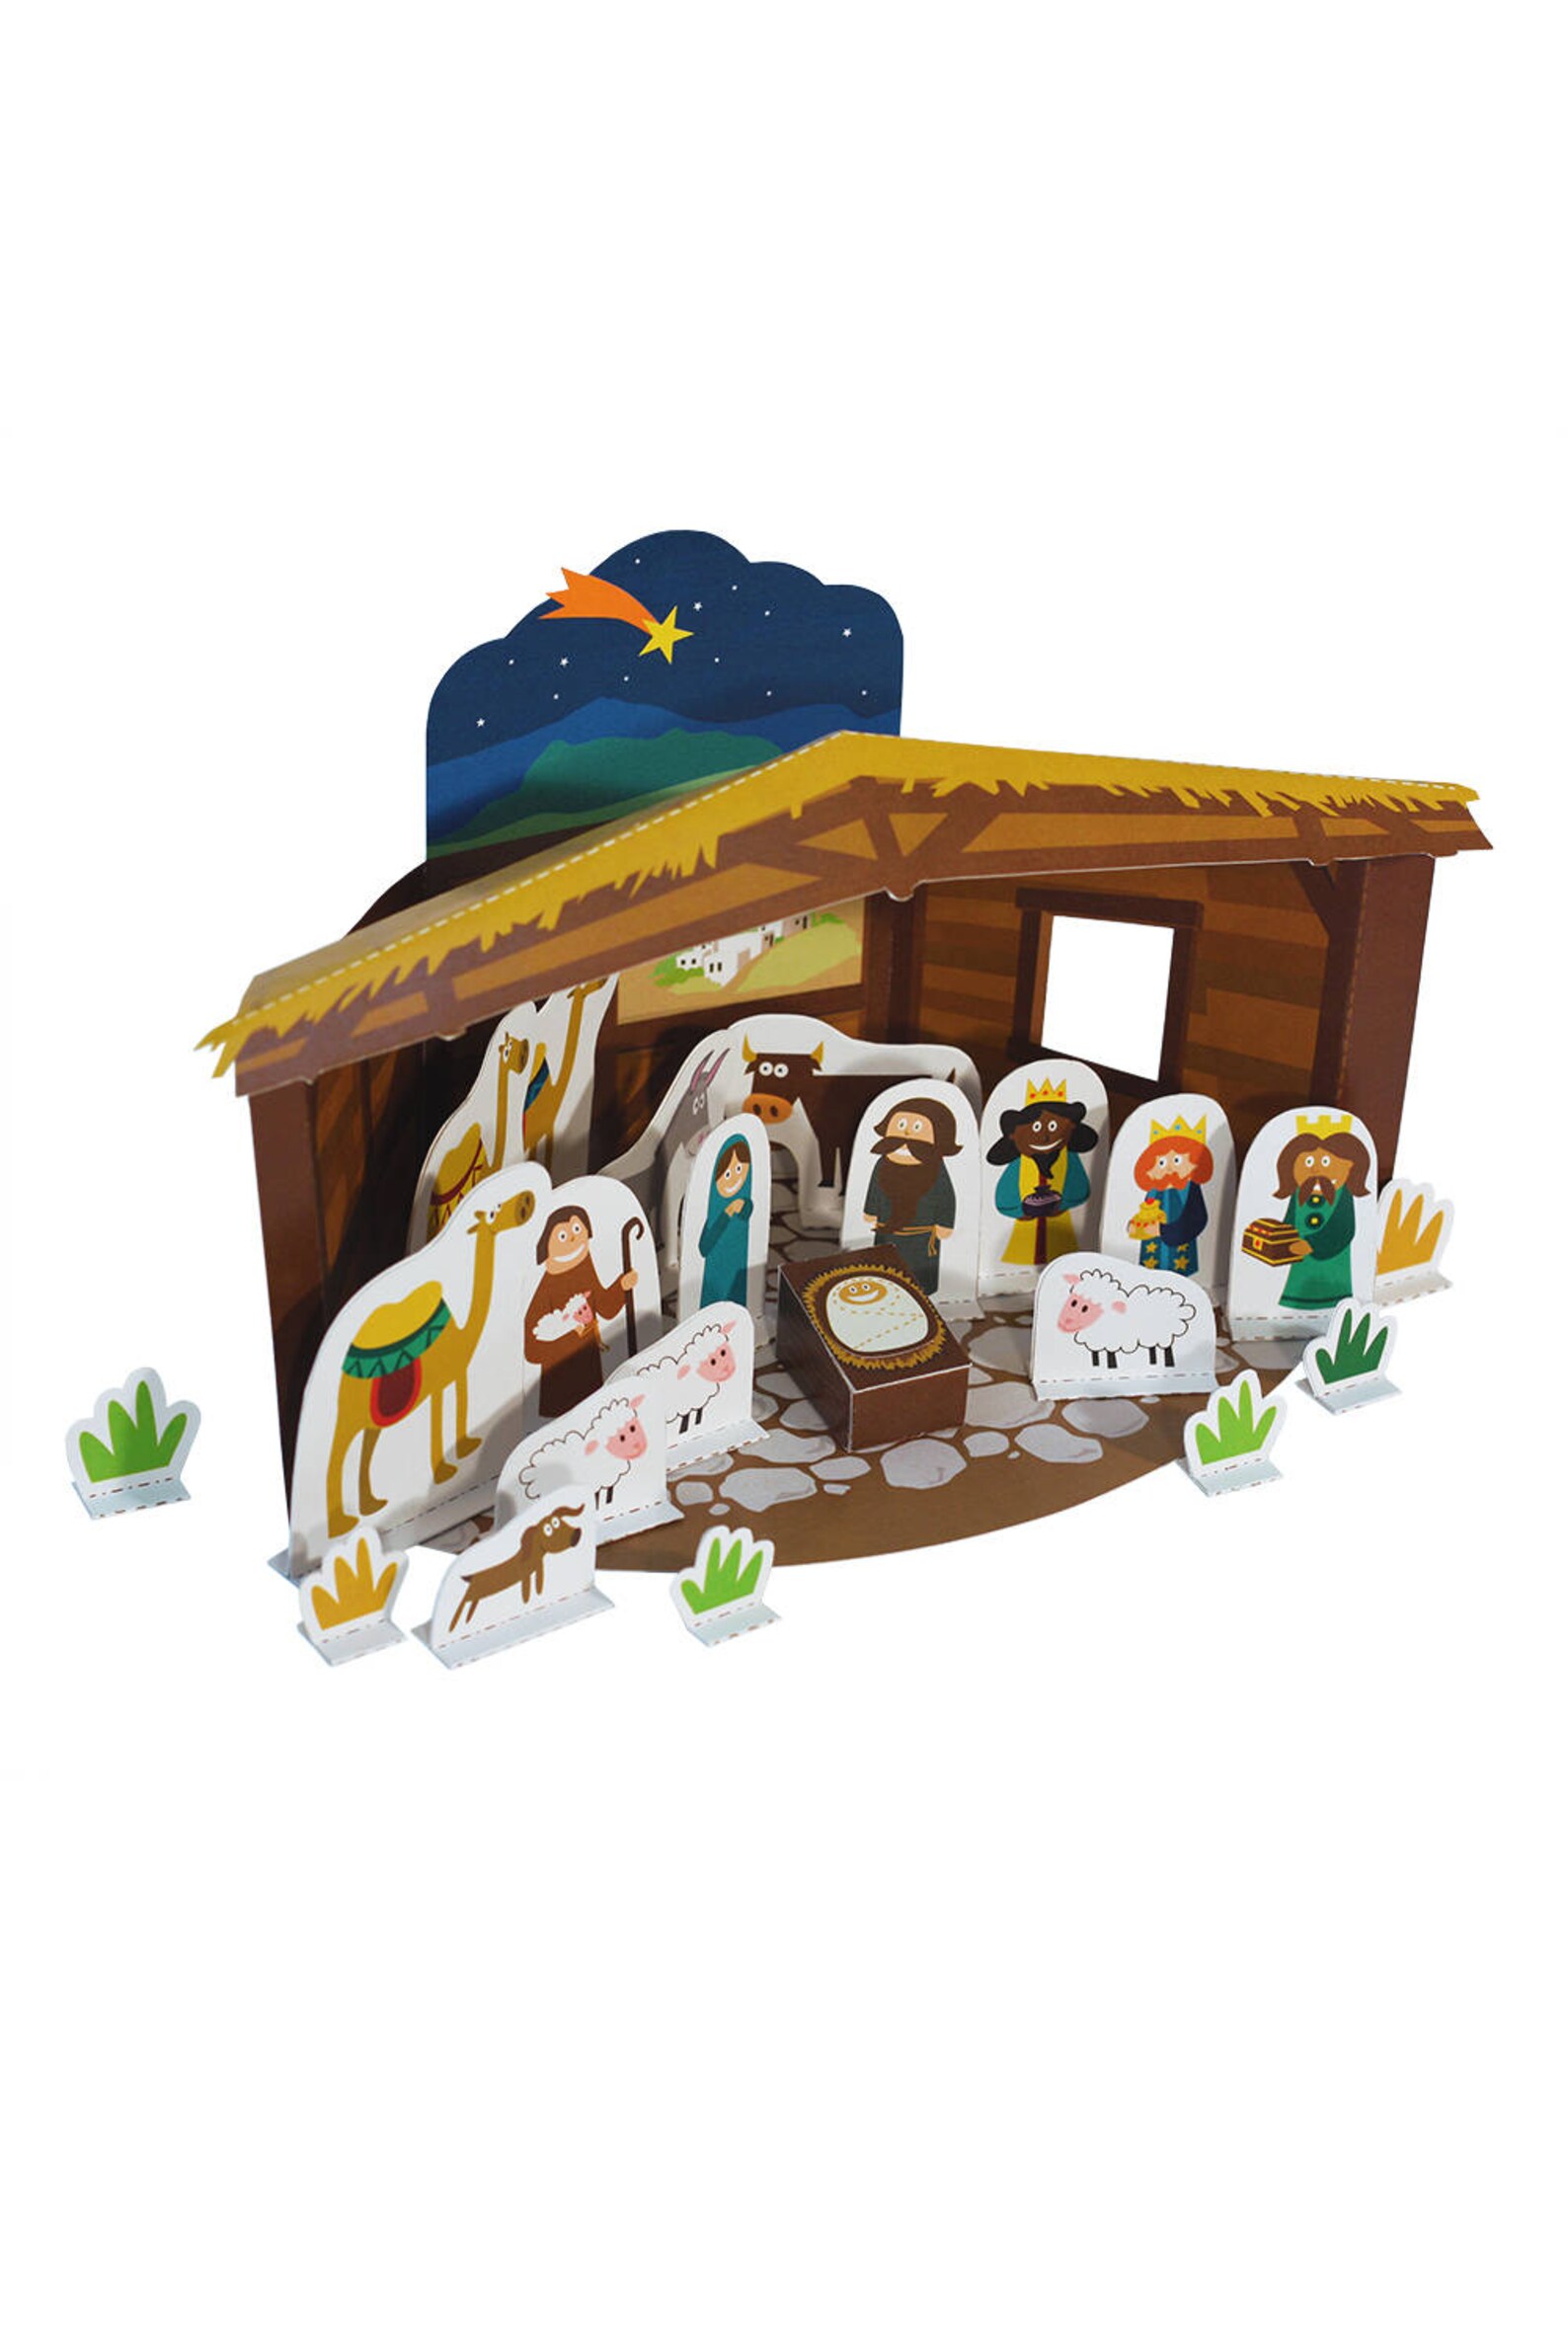 Nativity Scene Paper Theater DIY Paper Craft Kit Paper Toy - Etsy